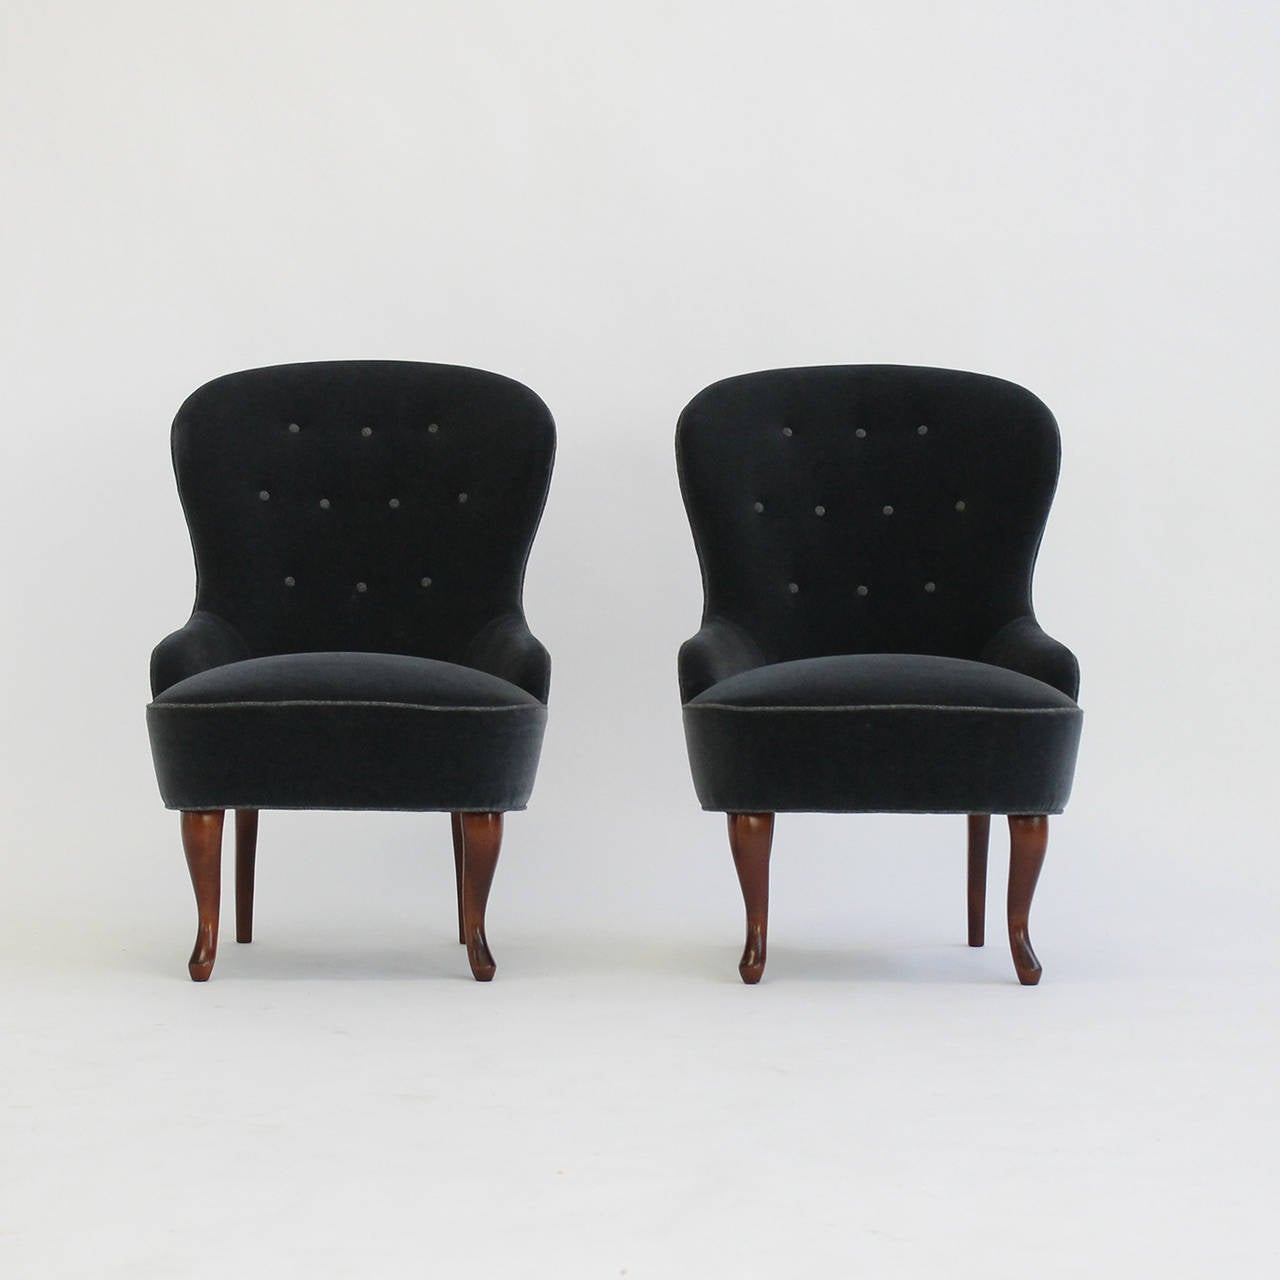 Swedish Slipper Chairs In Excellent Condition For Sale In Chicago, IL